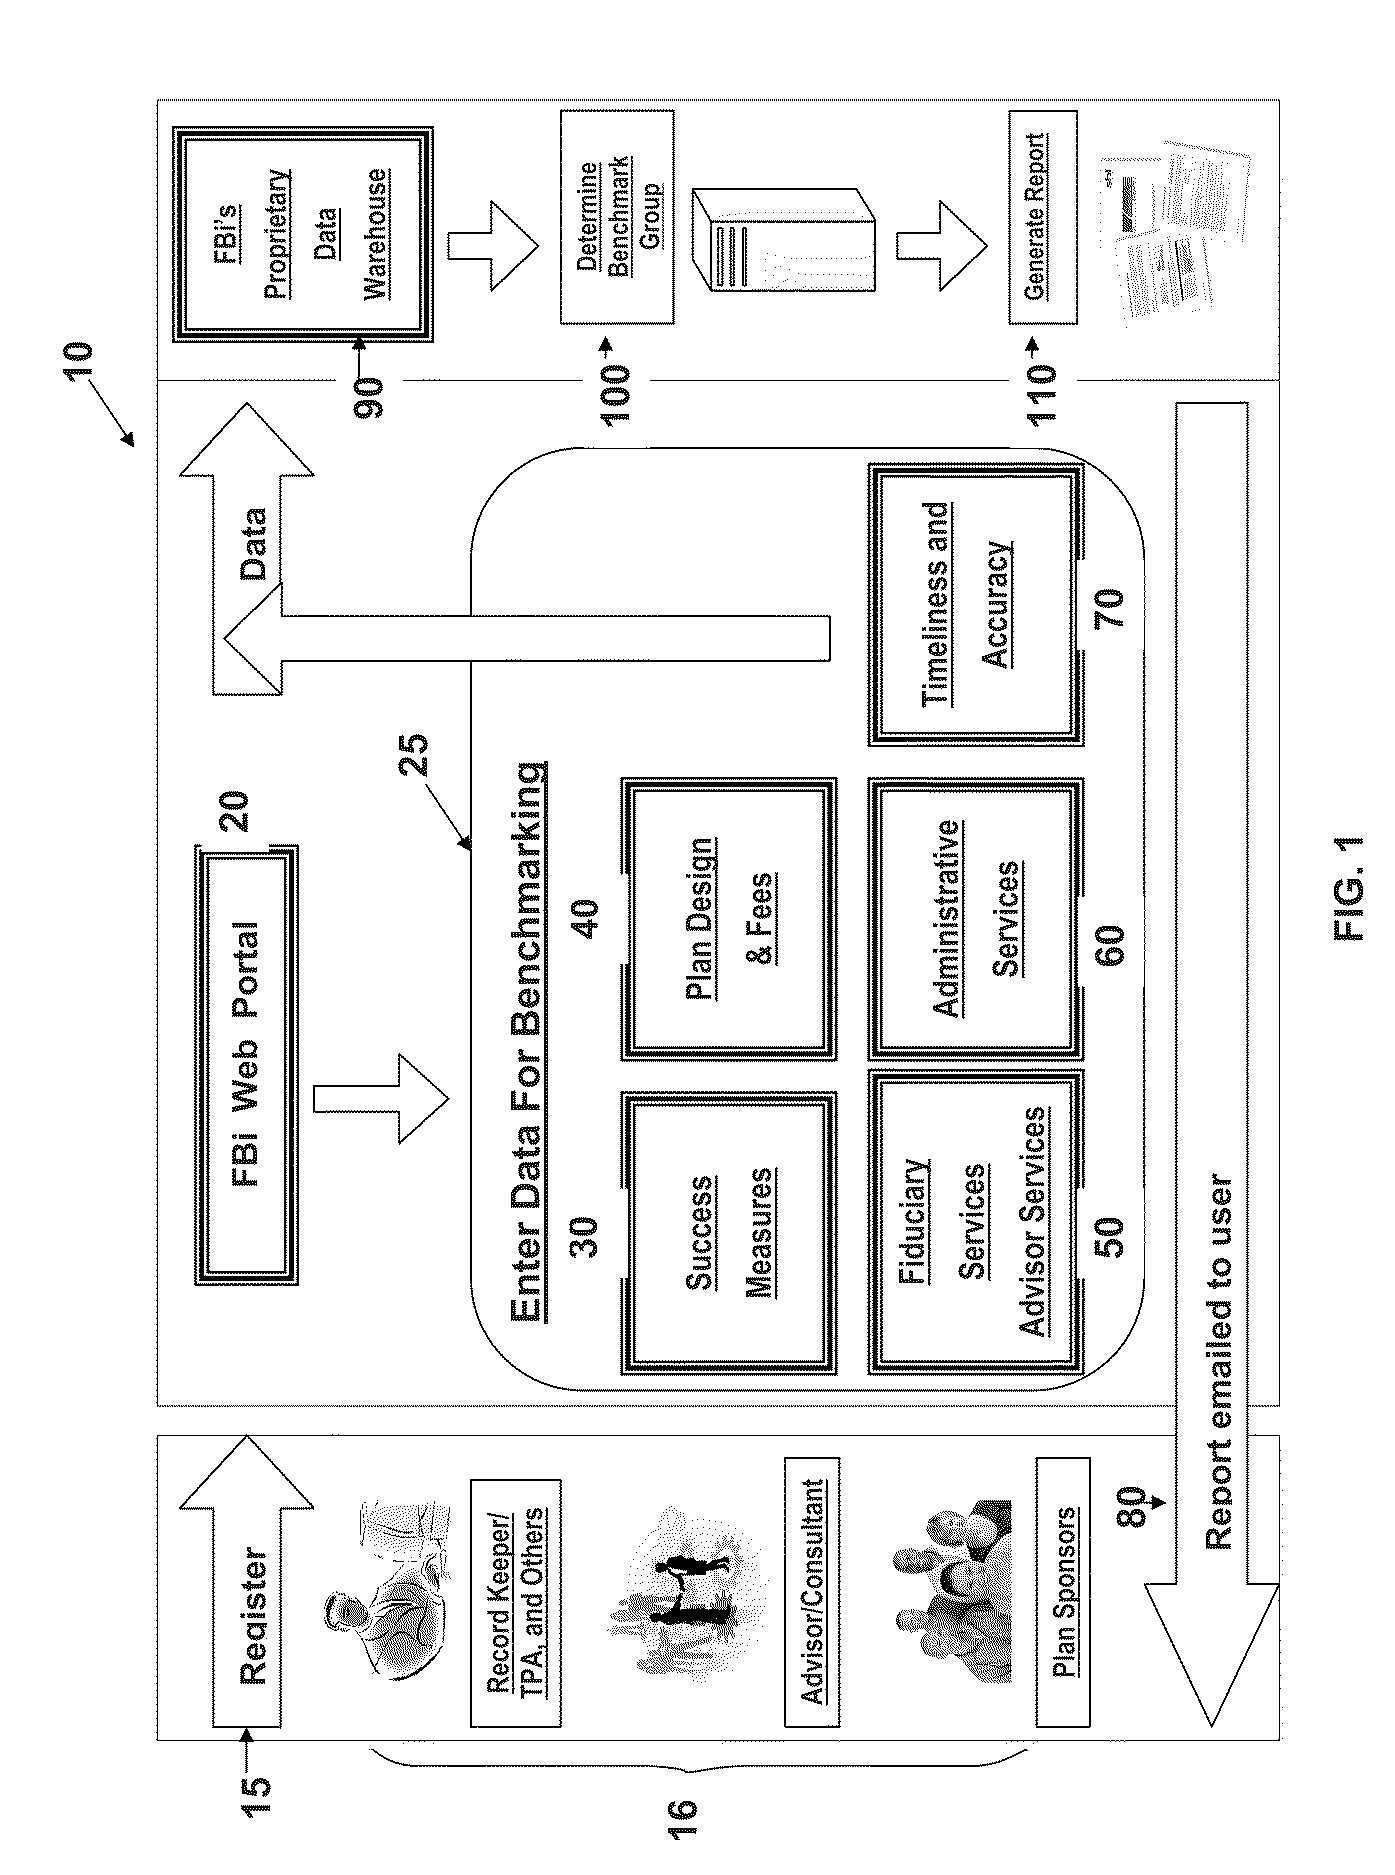 System and method for evaluating defined contribution plans